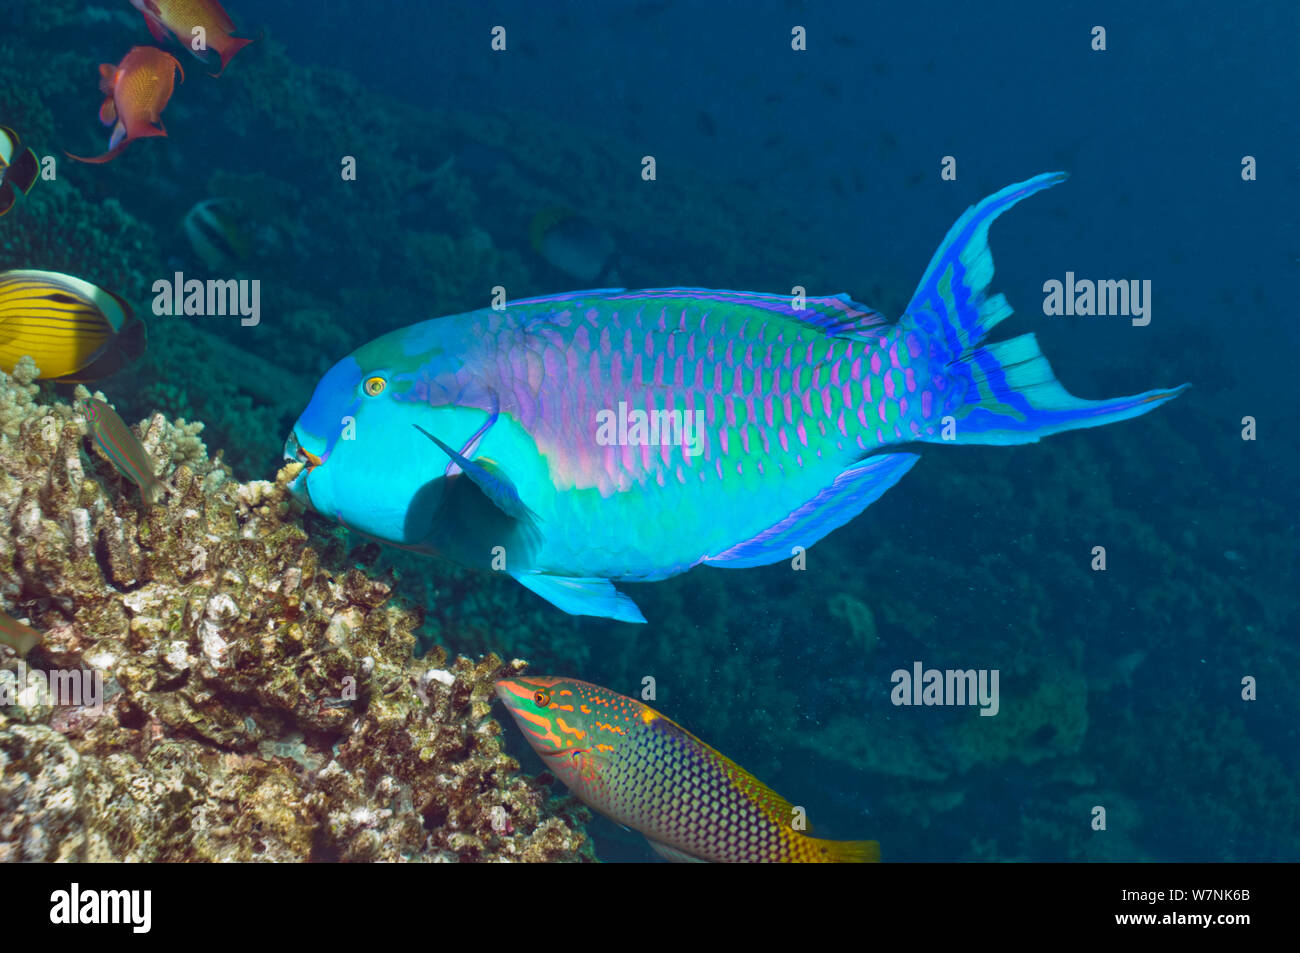 Steep headed parrotfish (Scarus gibbus), feeding male followed by a Chequerboard wrasse (Halichoeres hortulanus). Egypt, Red Sea. Stock Photo